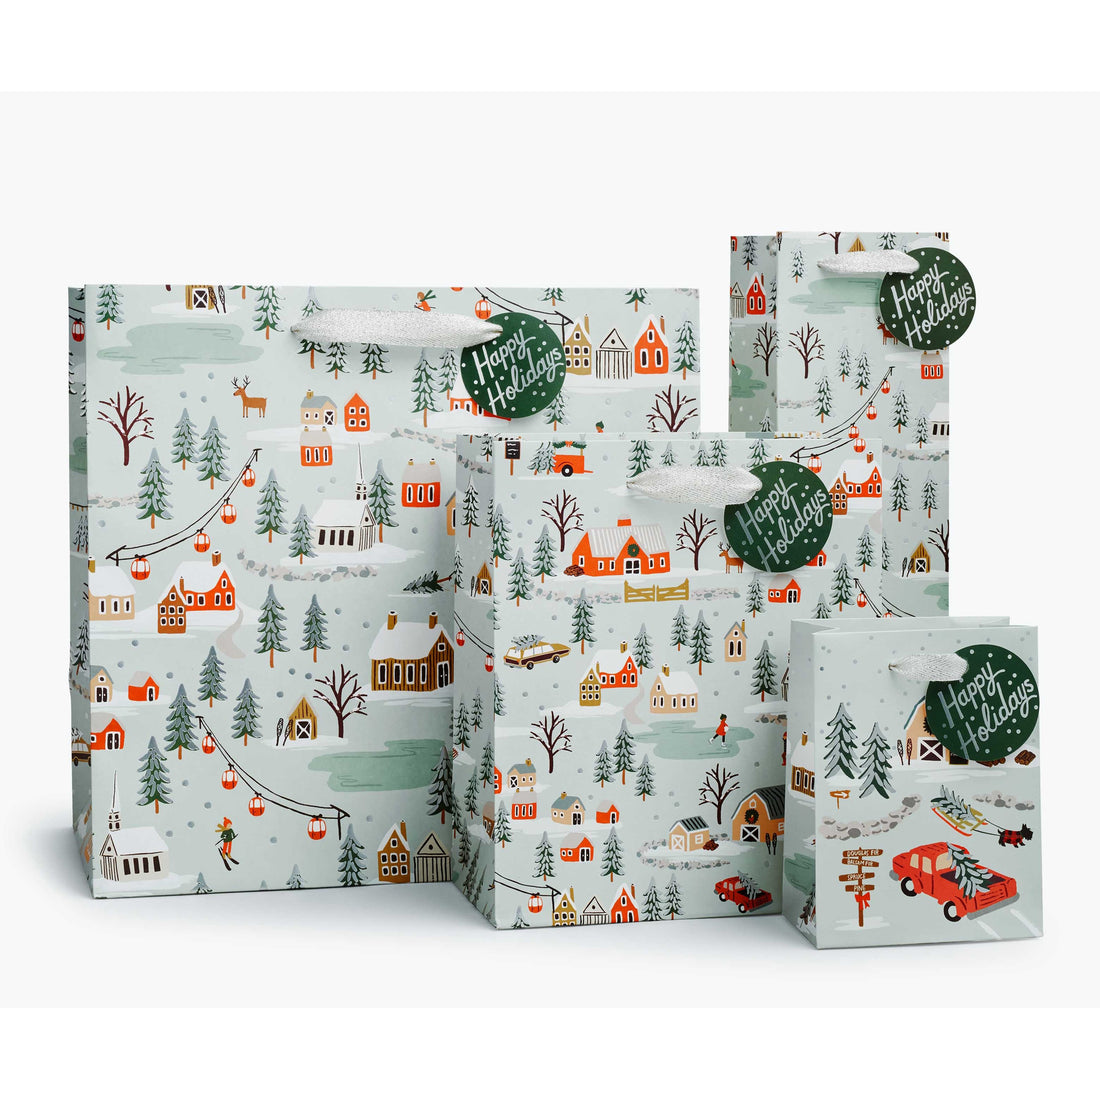 rifle-paper-co-holiday-village-small-gift-bag-rifl-gbx006-s- (2)